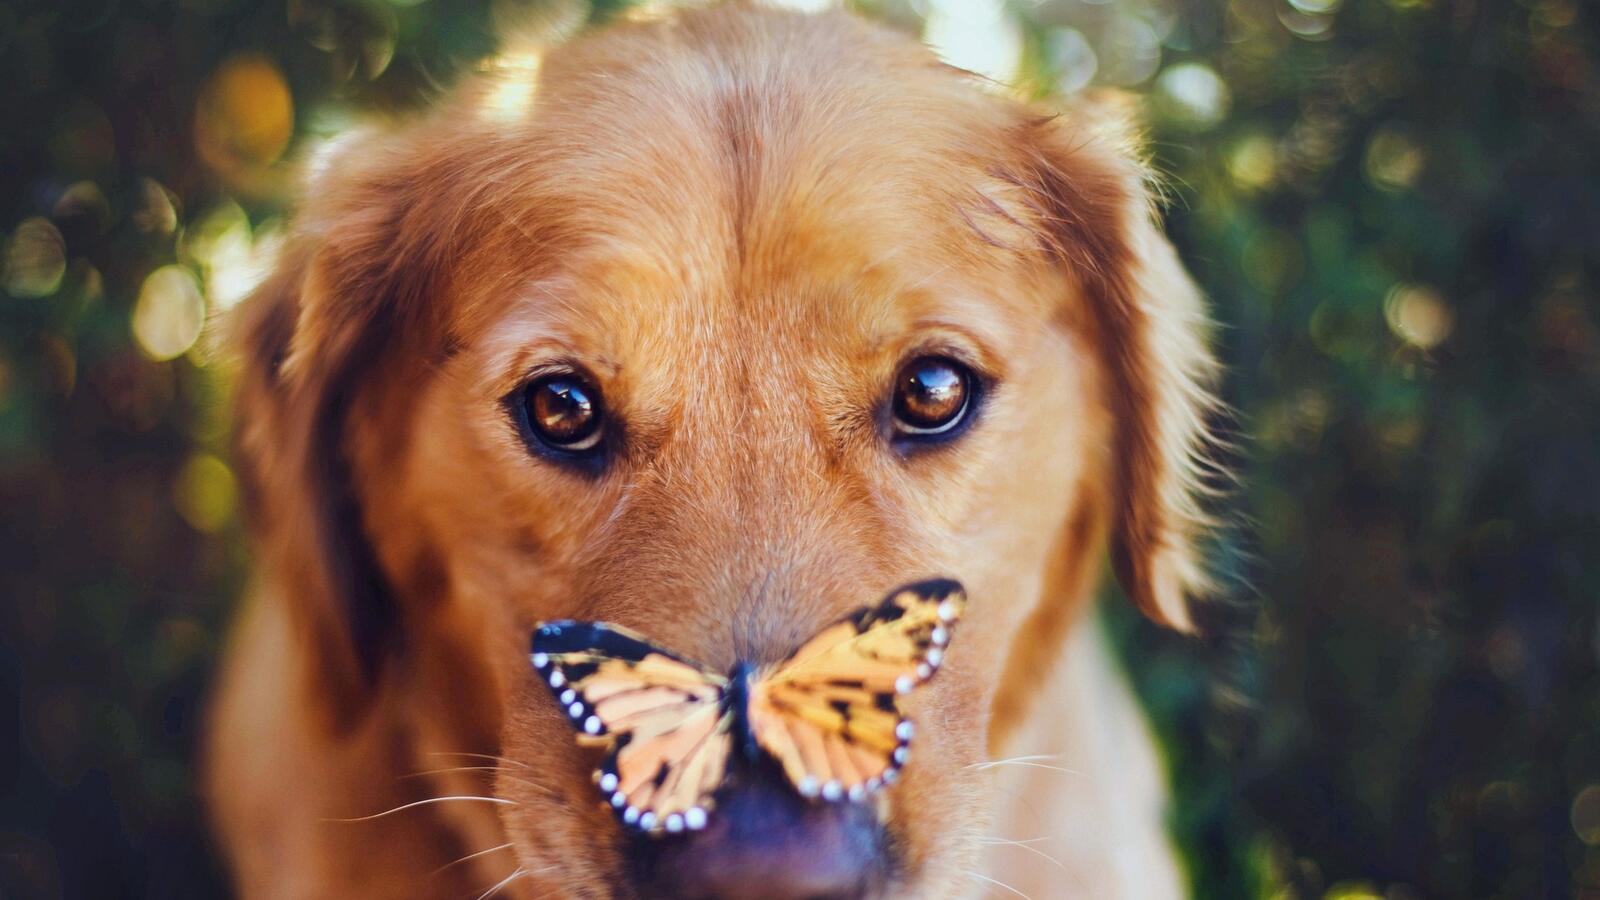 Wallpapers butterfly dog look on the desktop